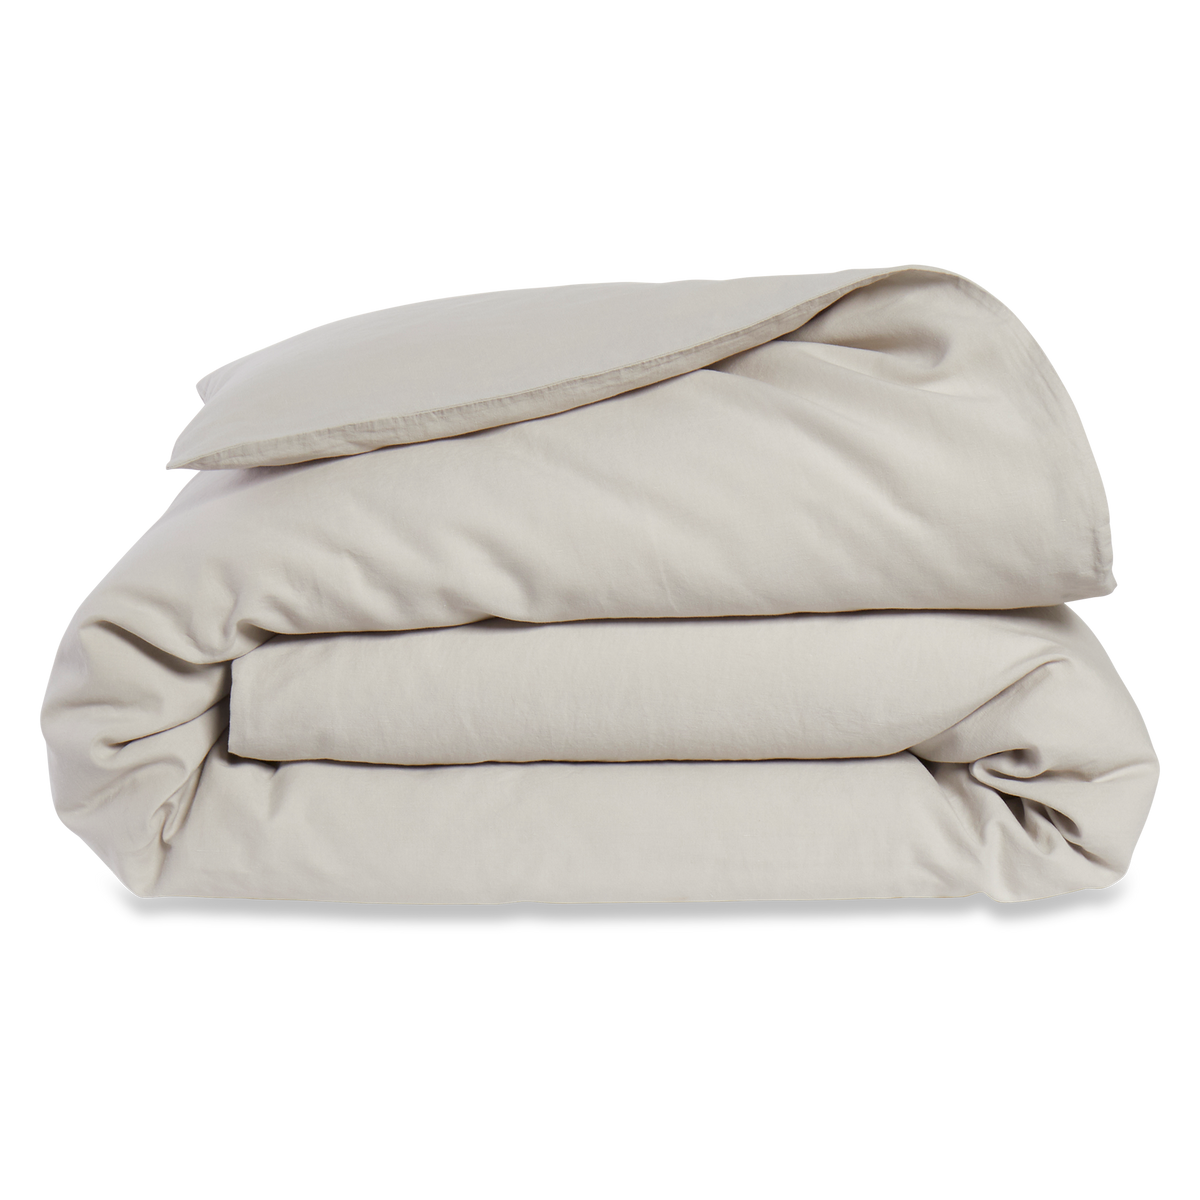 Made in Portugal from a blend of linen and cotton, this duvet cover features an airy, textured feel and a relaxed, laidback look.